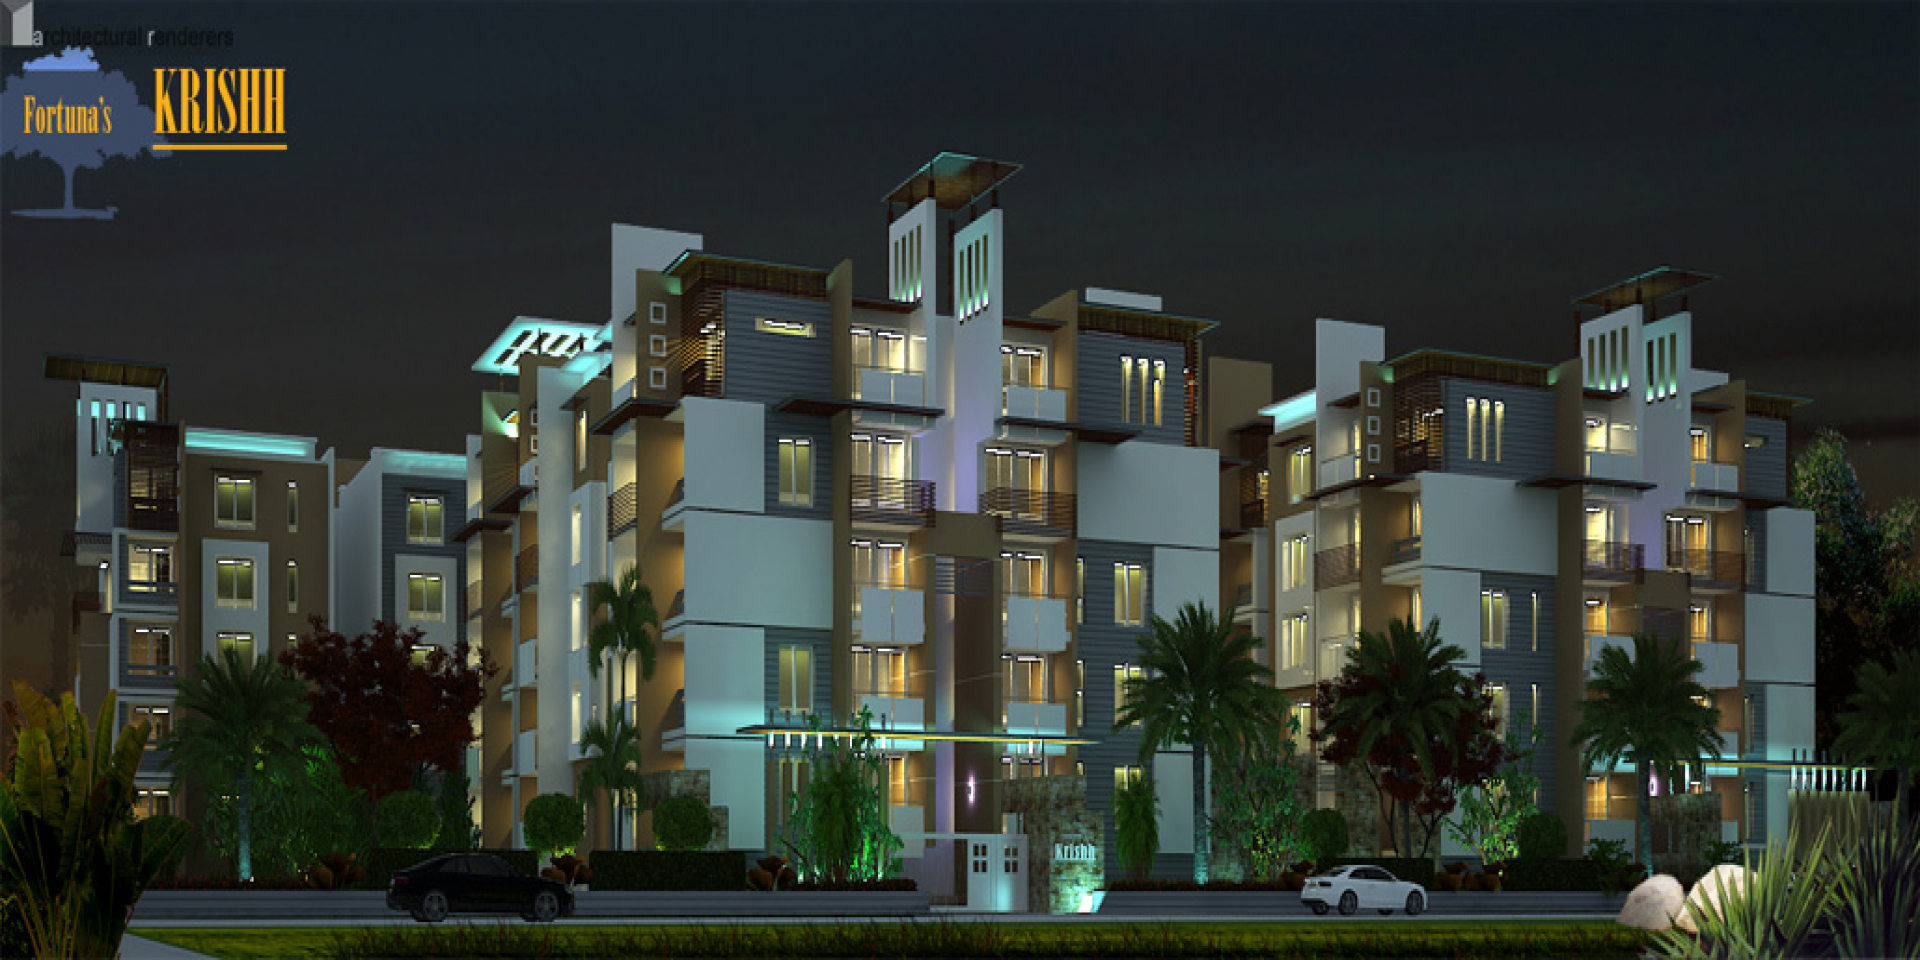 2, 3 BHK Apartment for sale in Horamavu